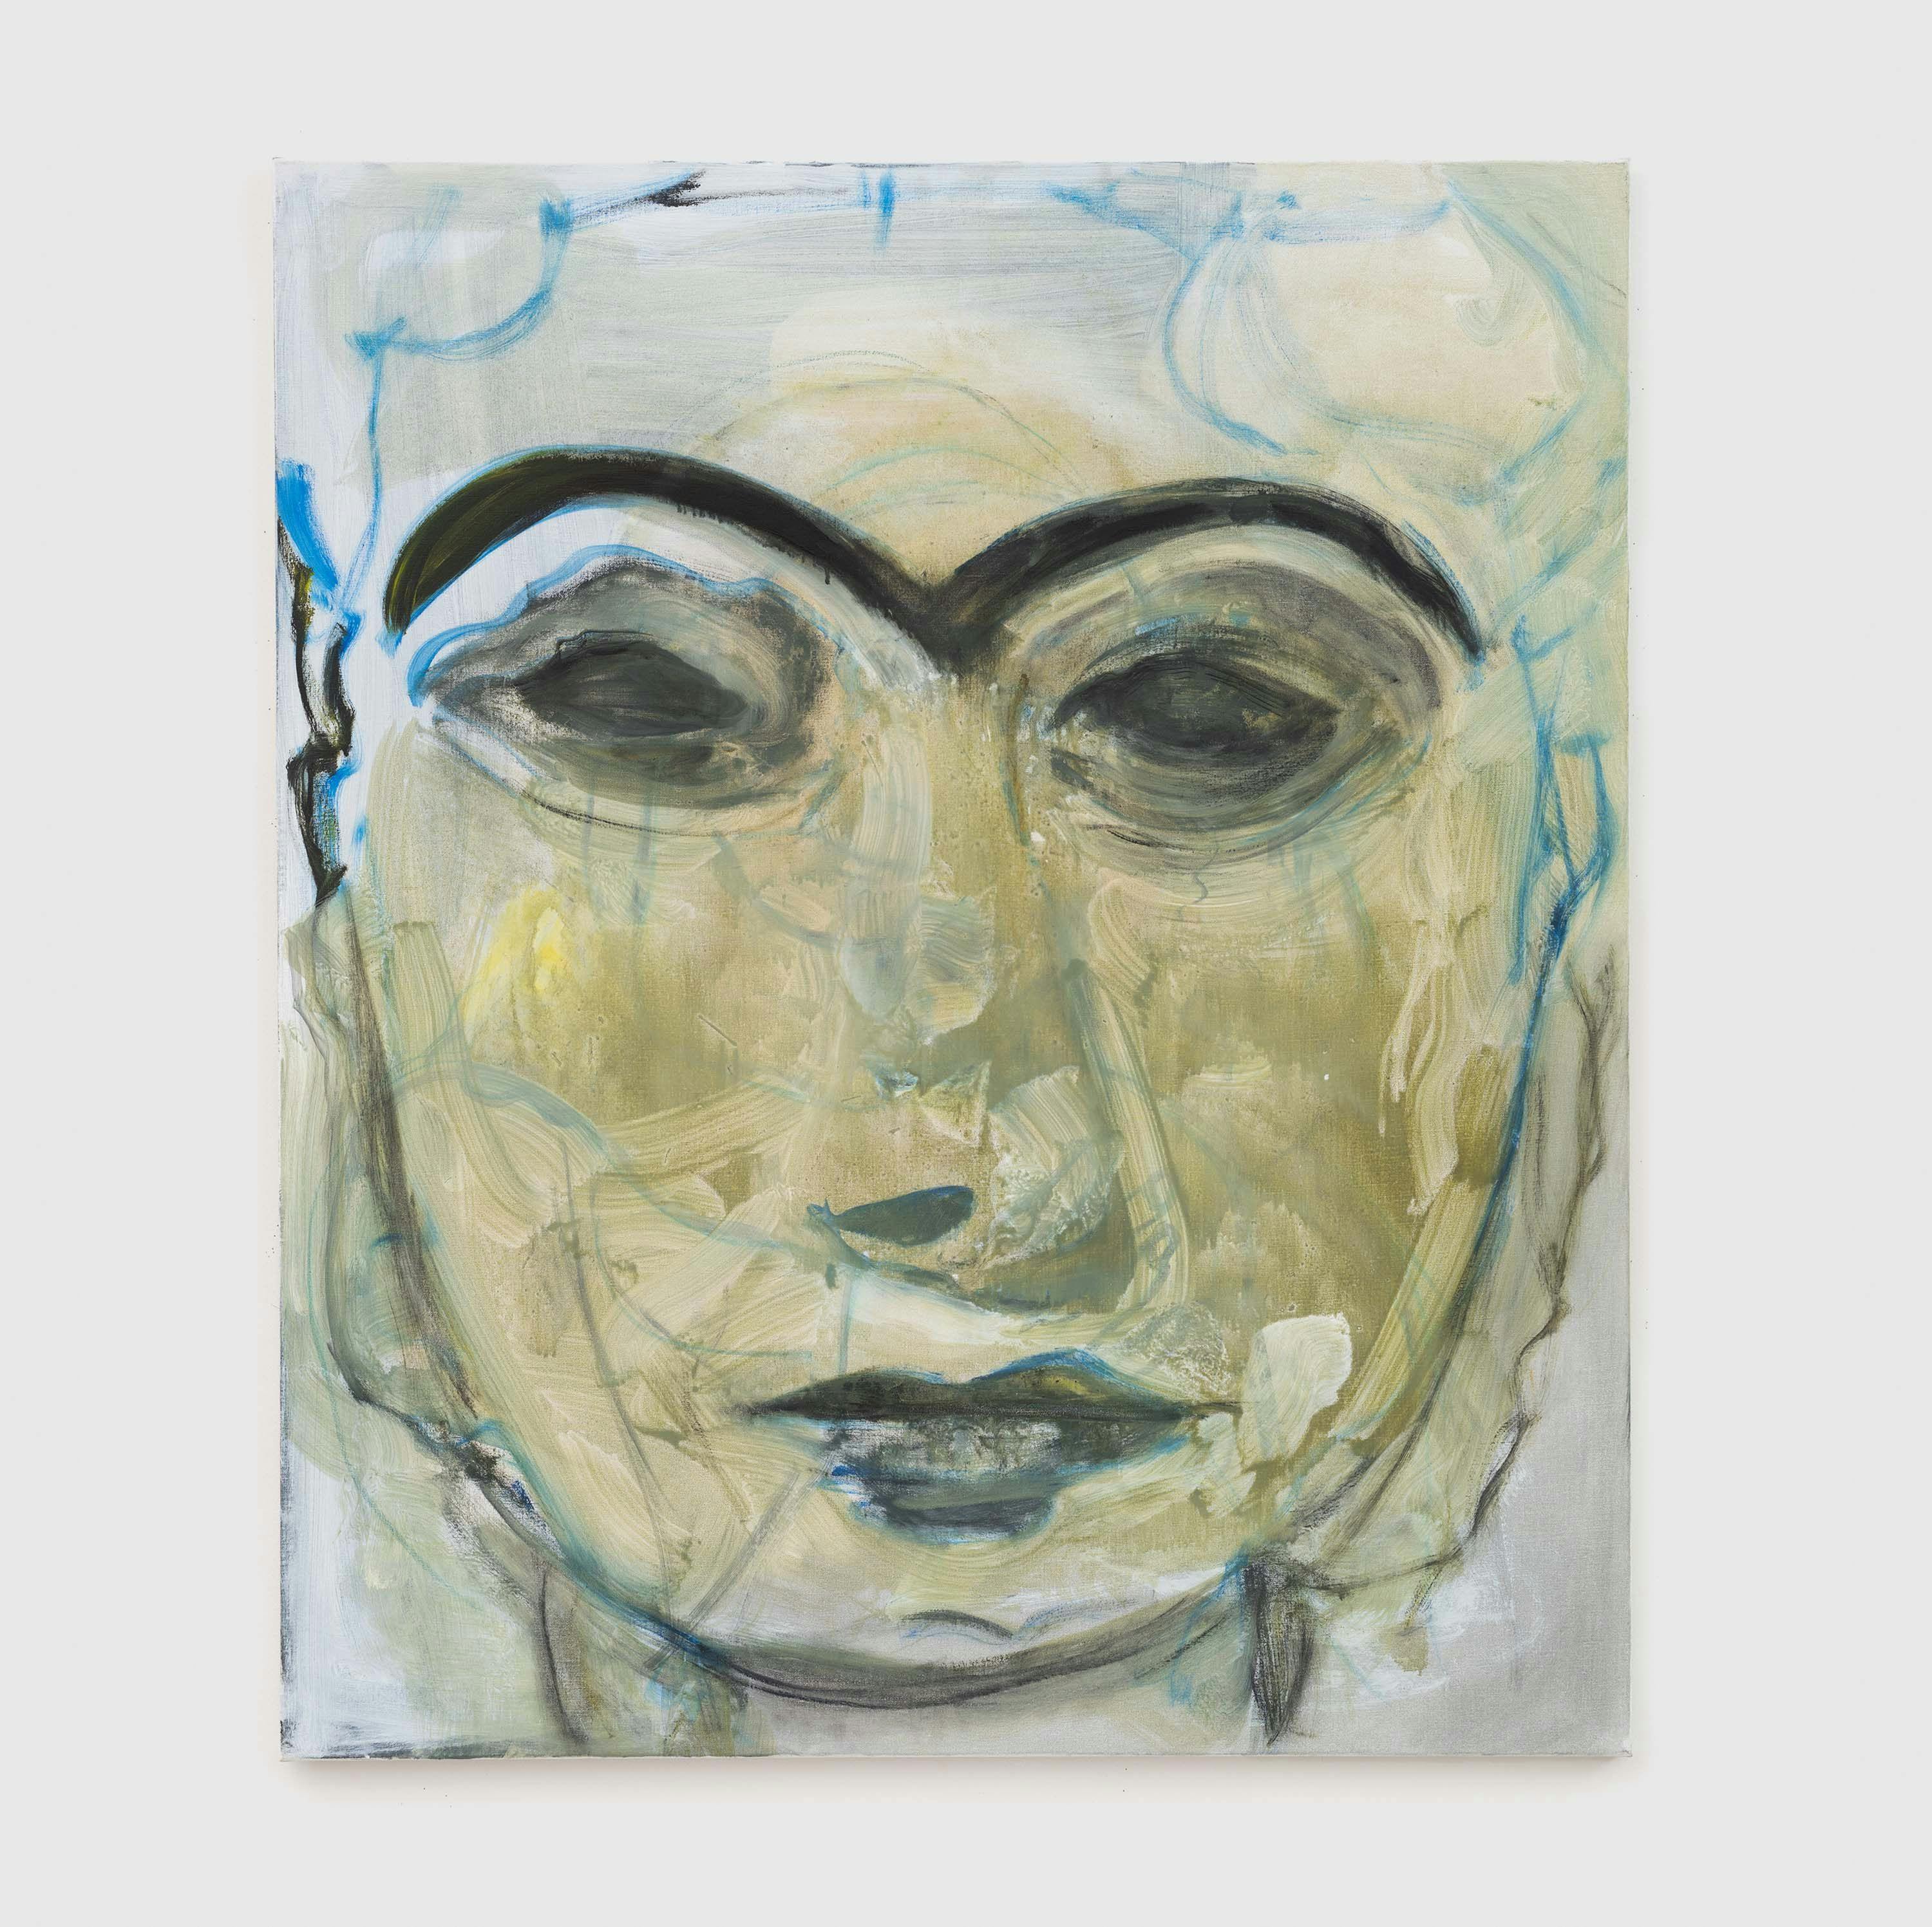 An oil on canvas painting by Marlene Dumas, titled Lady of Uruk, dated 2020.